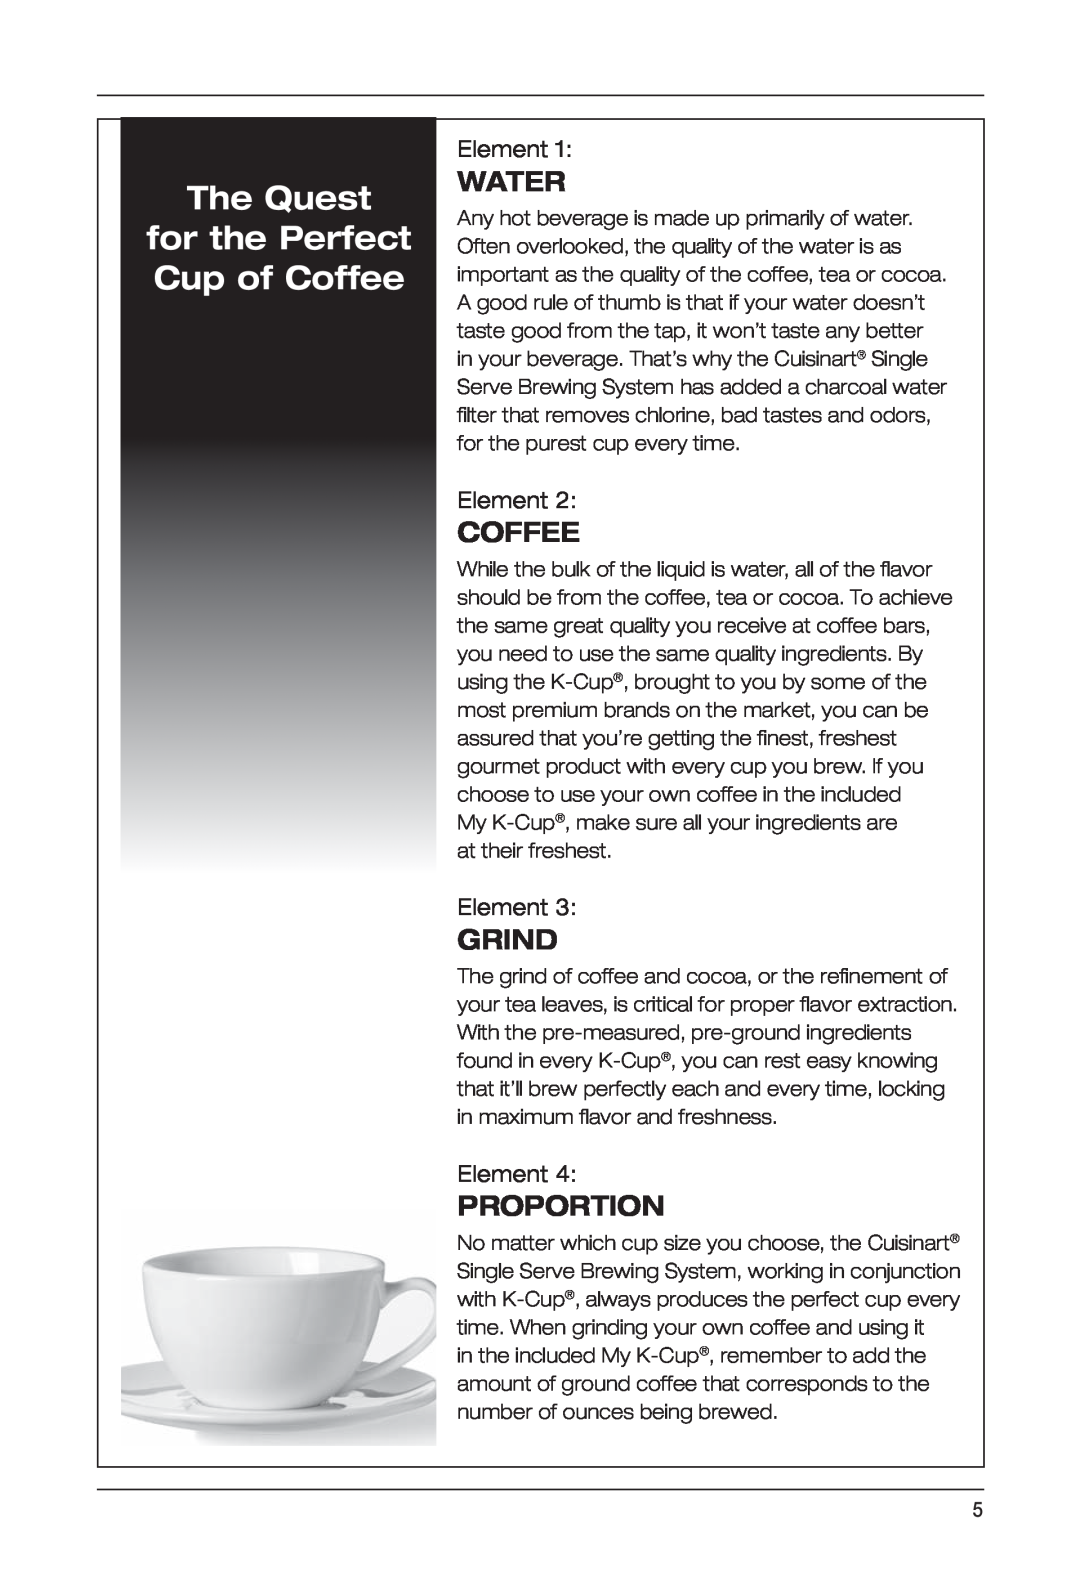 Keurig SS-700BK manual The Quest for the Perfect Cup of Coffee, Water, Grind, Proportion 